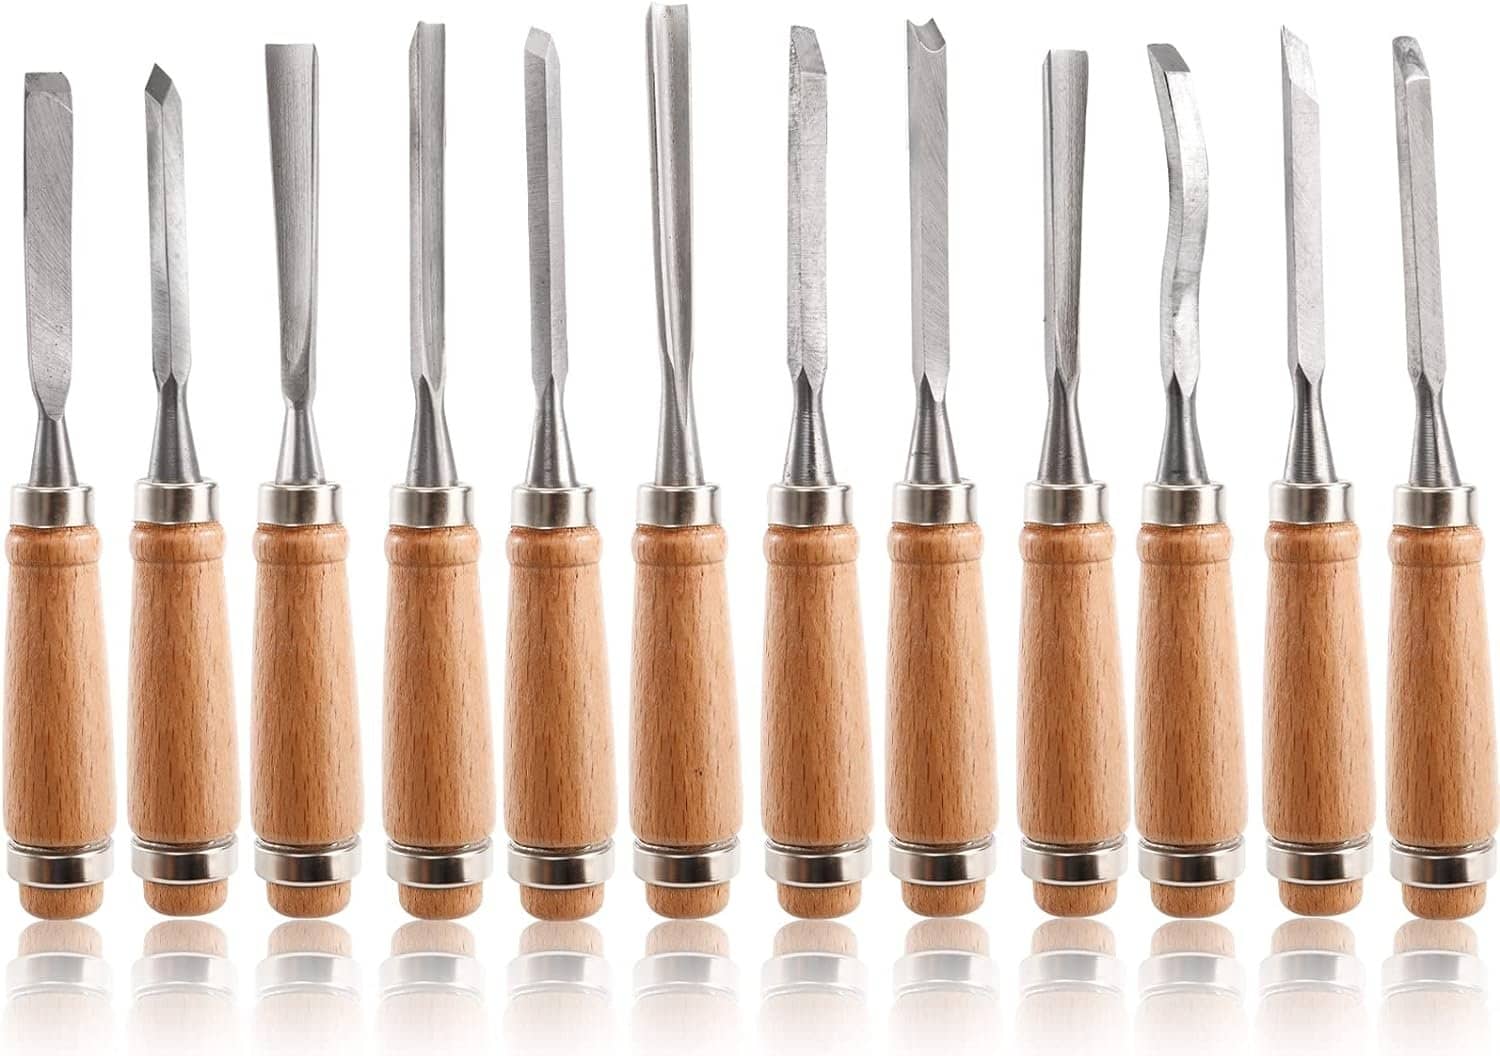 Dicunoy 12 PCS Wood Carving Tools, Gouges Woodworking Chisels, Full Size Wood Carving Knifes for Beginner, Hobbyists, Professionals, Artistic, Gifts for Him, Fathers Day : Arts, Crafts  Sewing